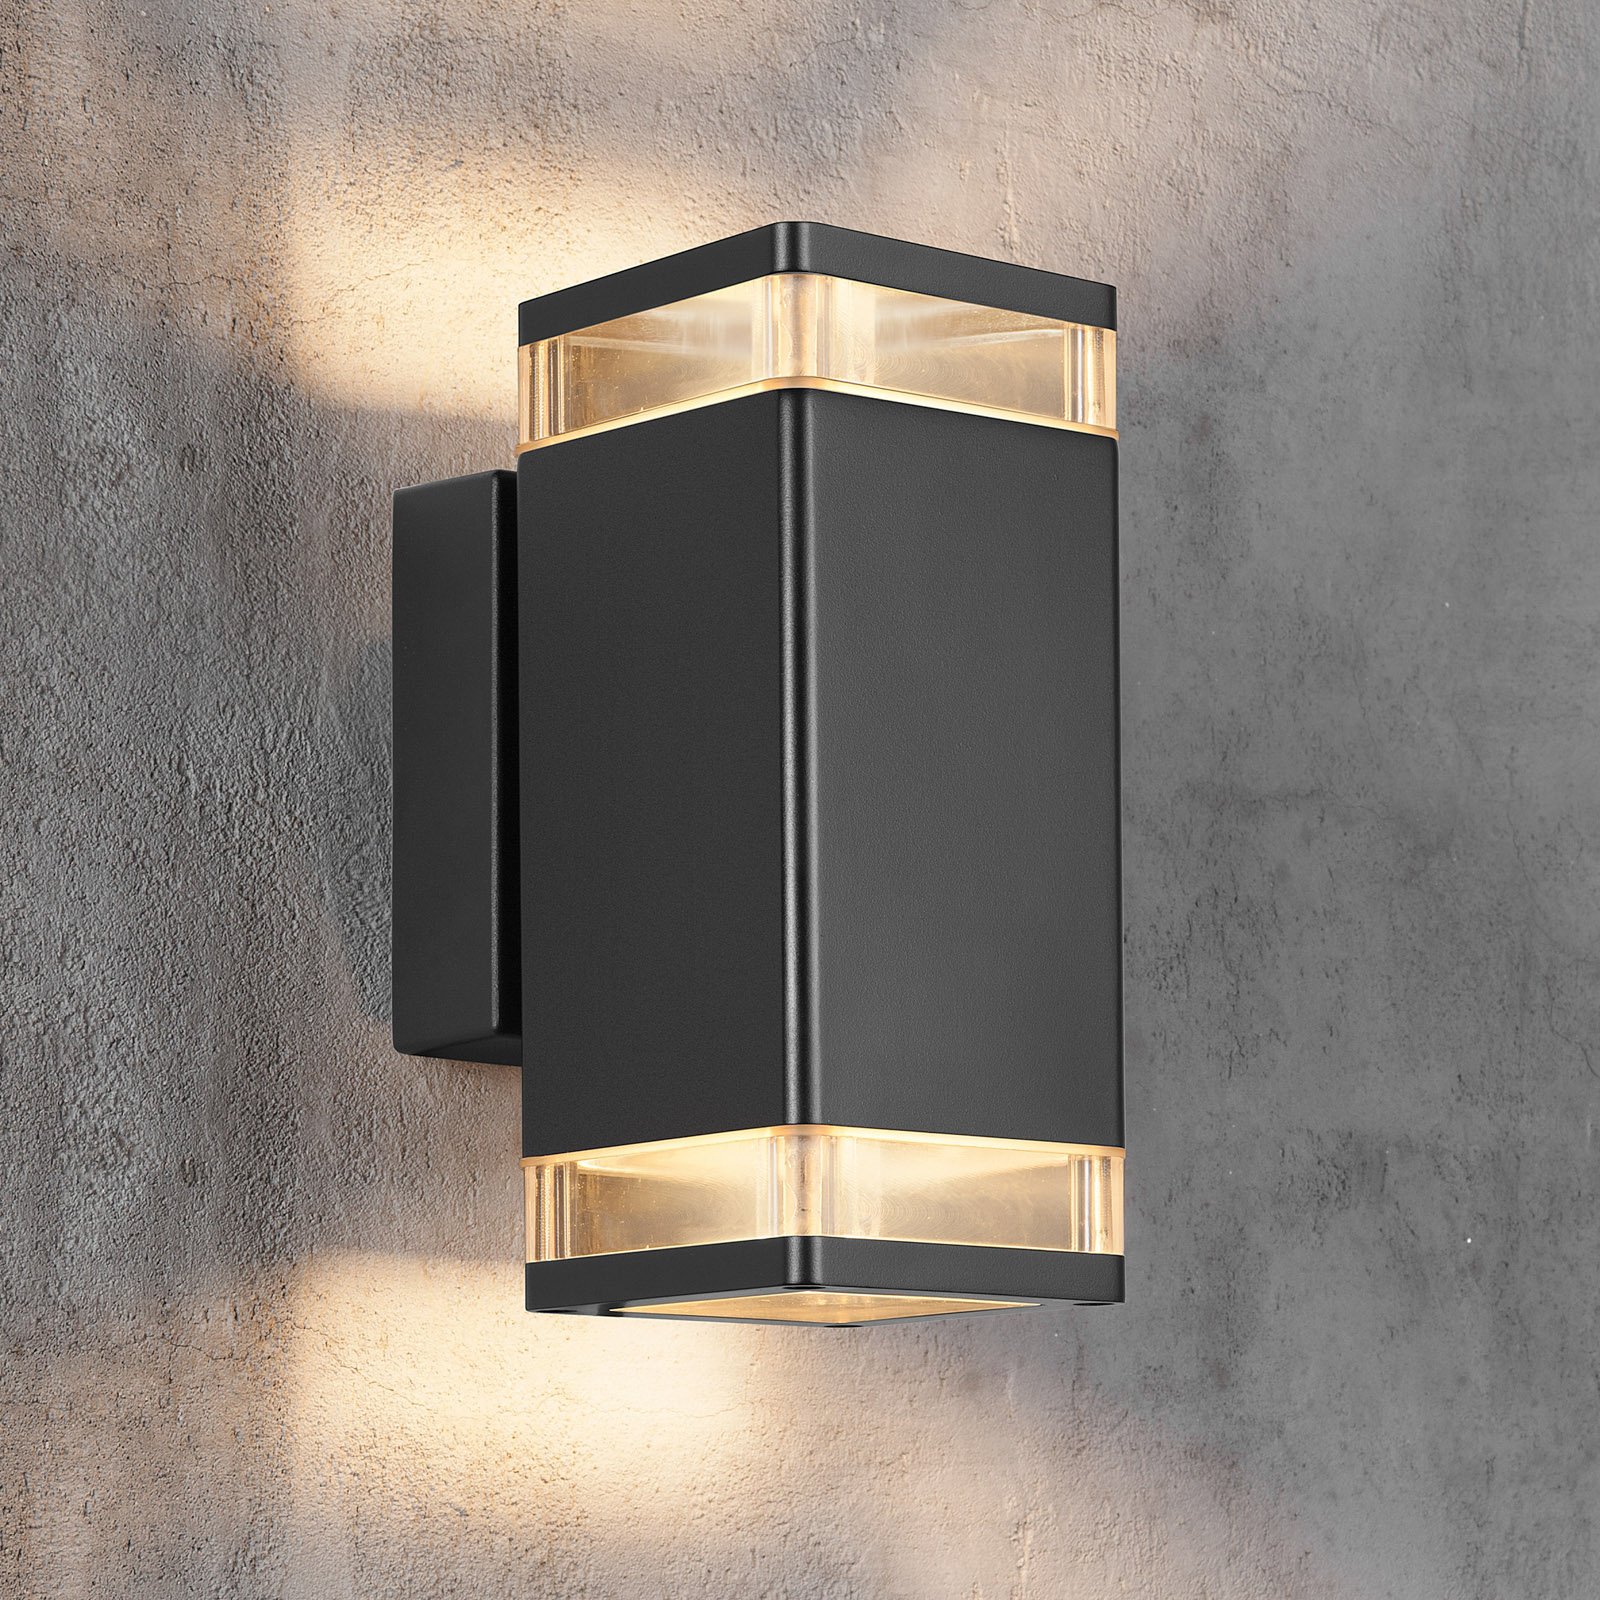 Elm outdoor wall light in black, two-bulb